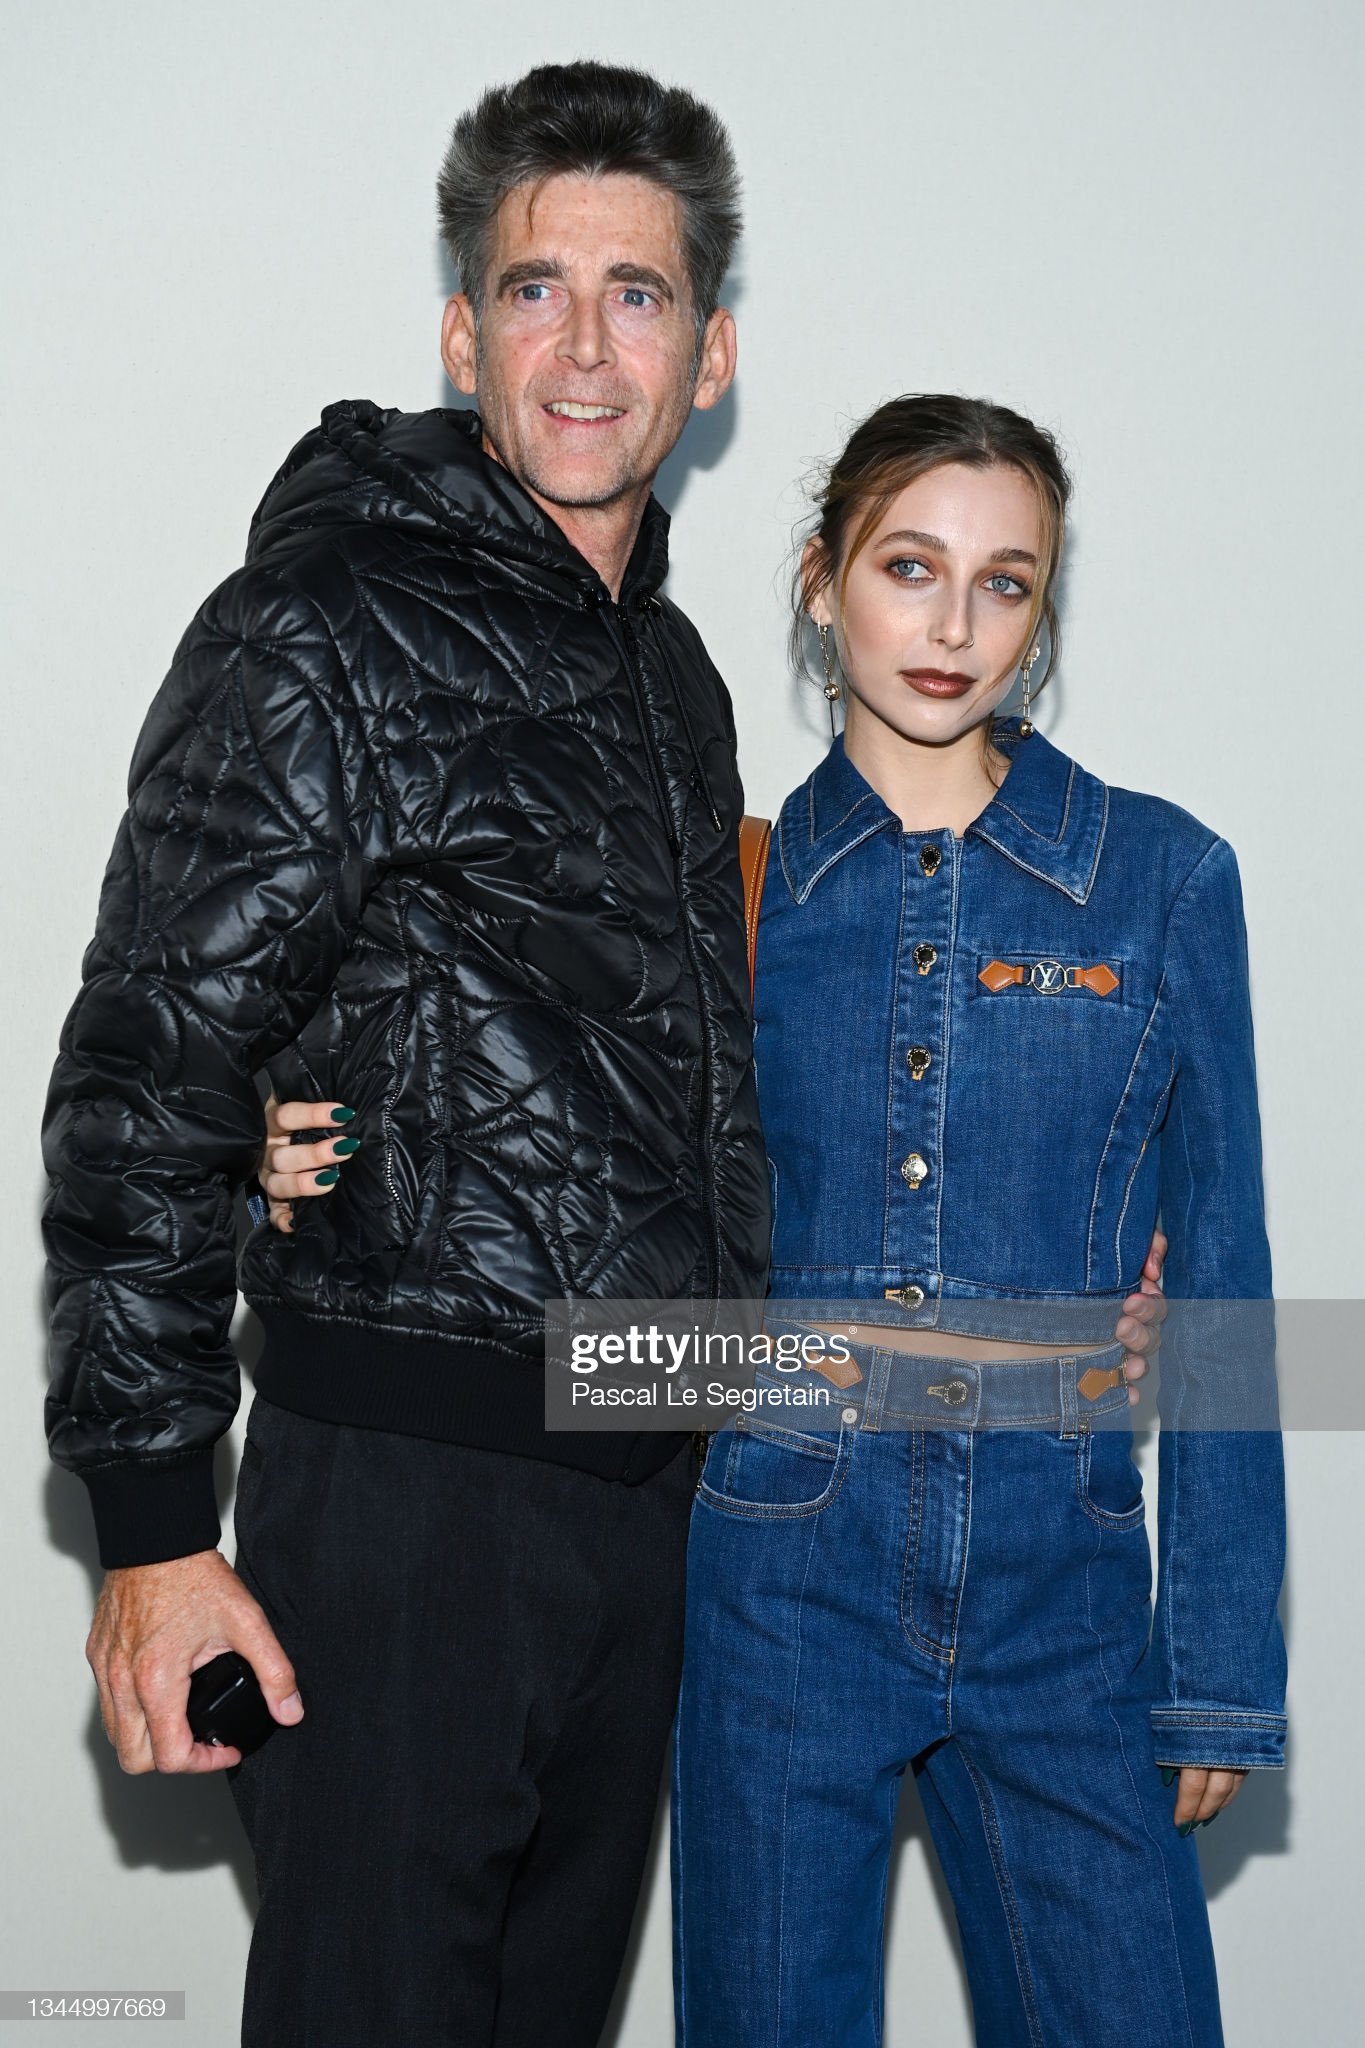 sally on Twitter: "emma chamberlain her dad the louis show in paris https://t.co/65CidKagKr" / Twitter